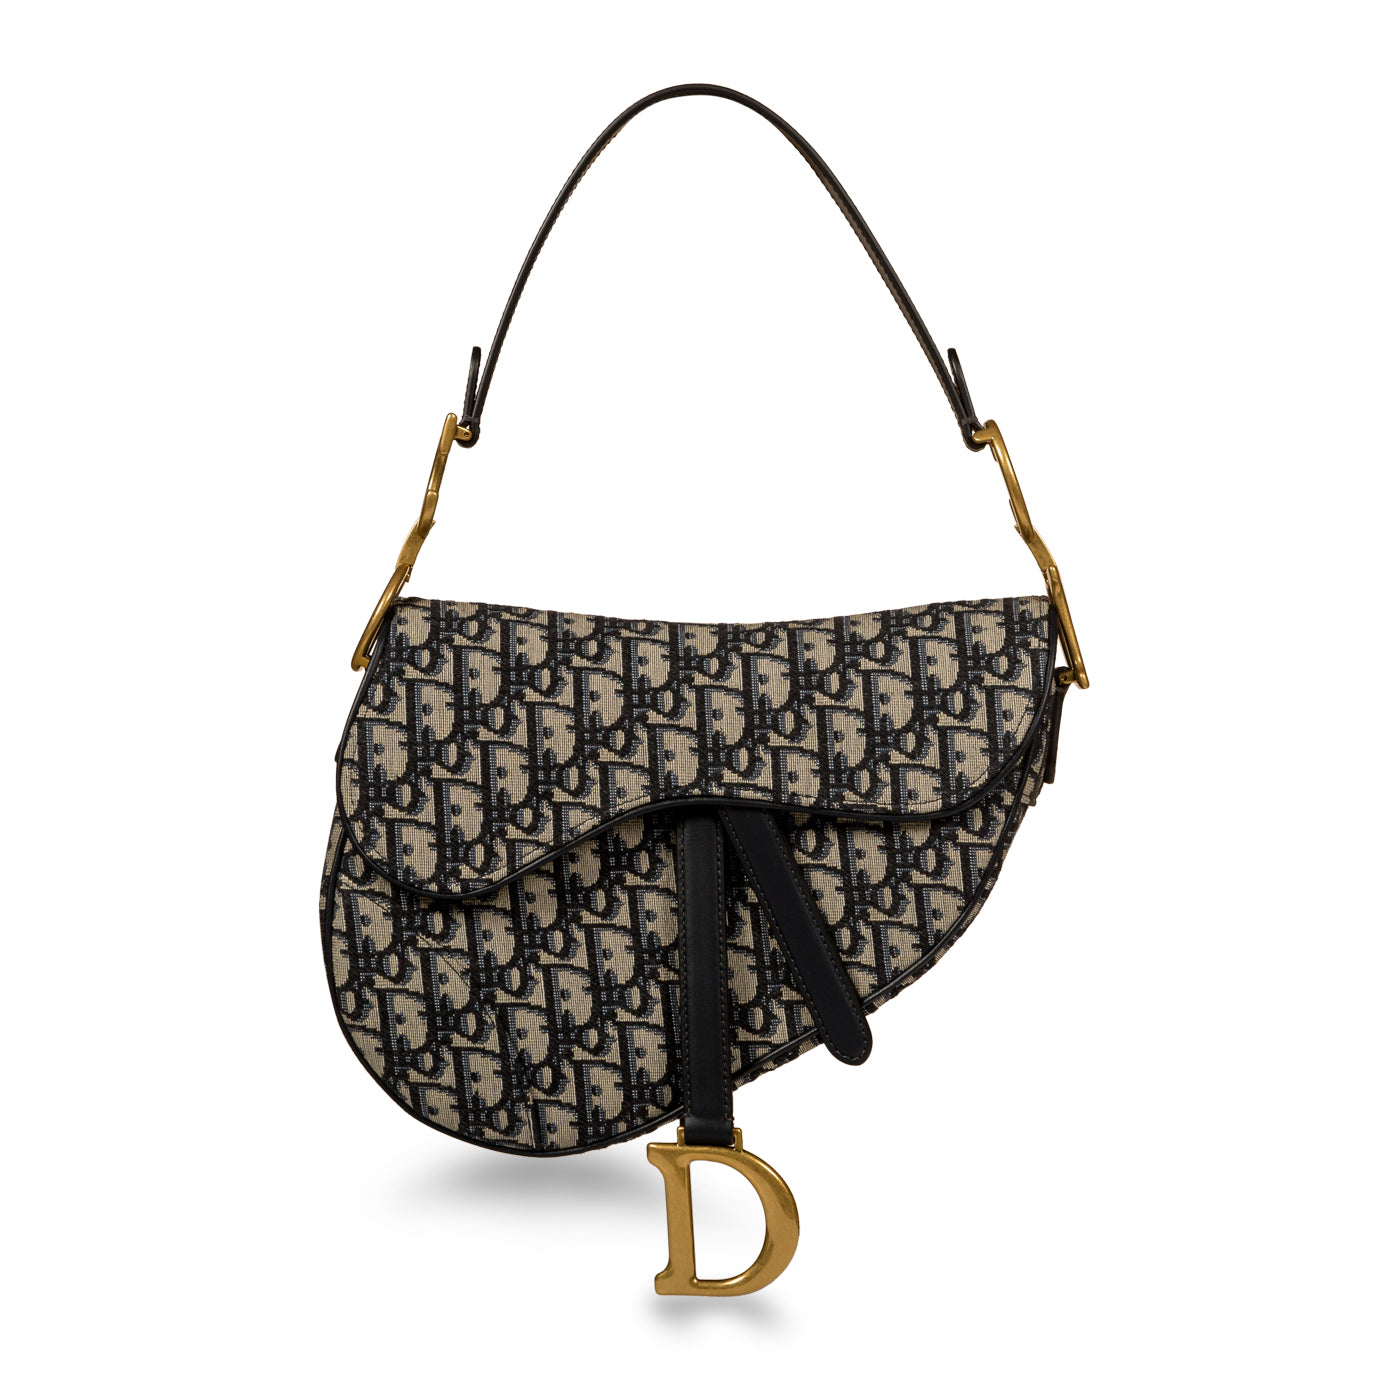 Dior Saddle Bag Review - Everything You Need To Know - CLOSS FASHION